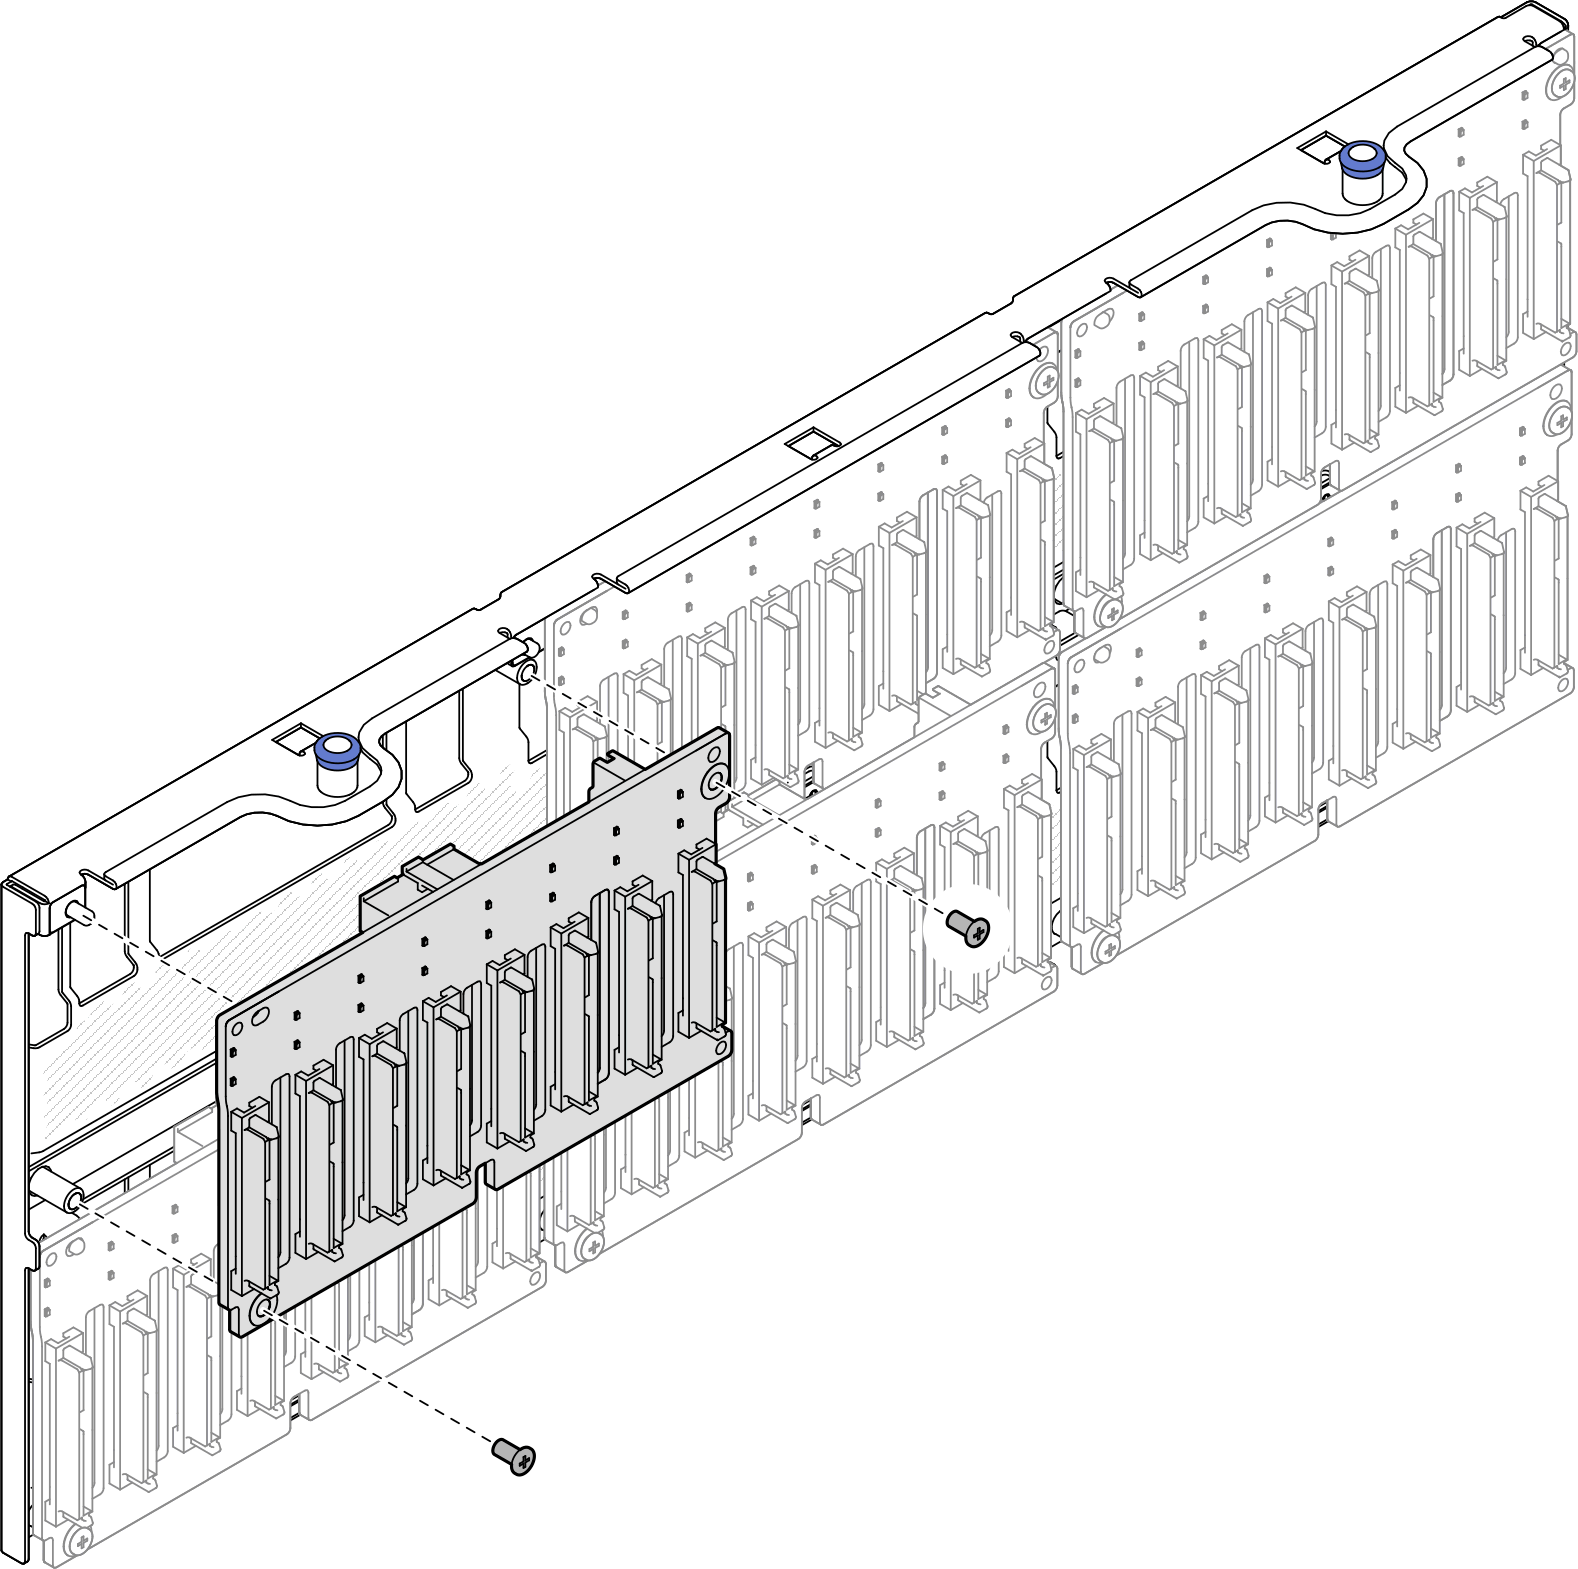 Removing backplane from carrier